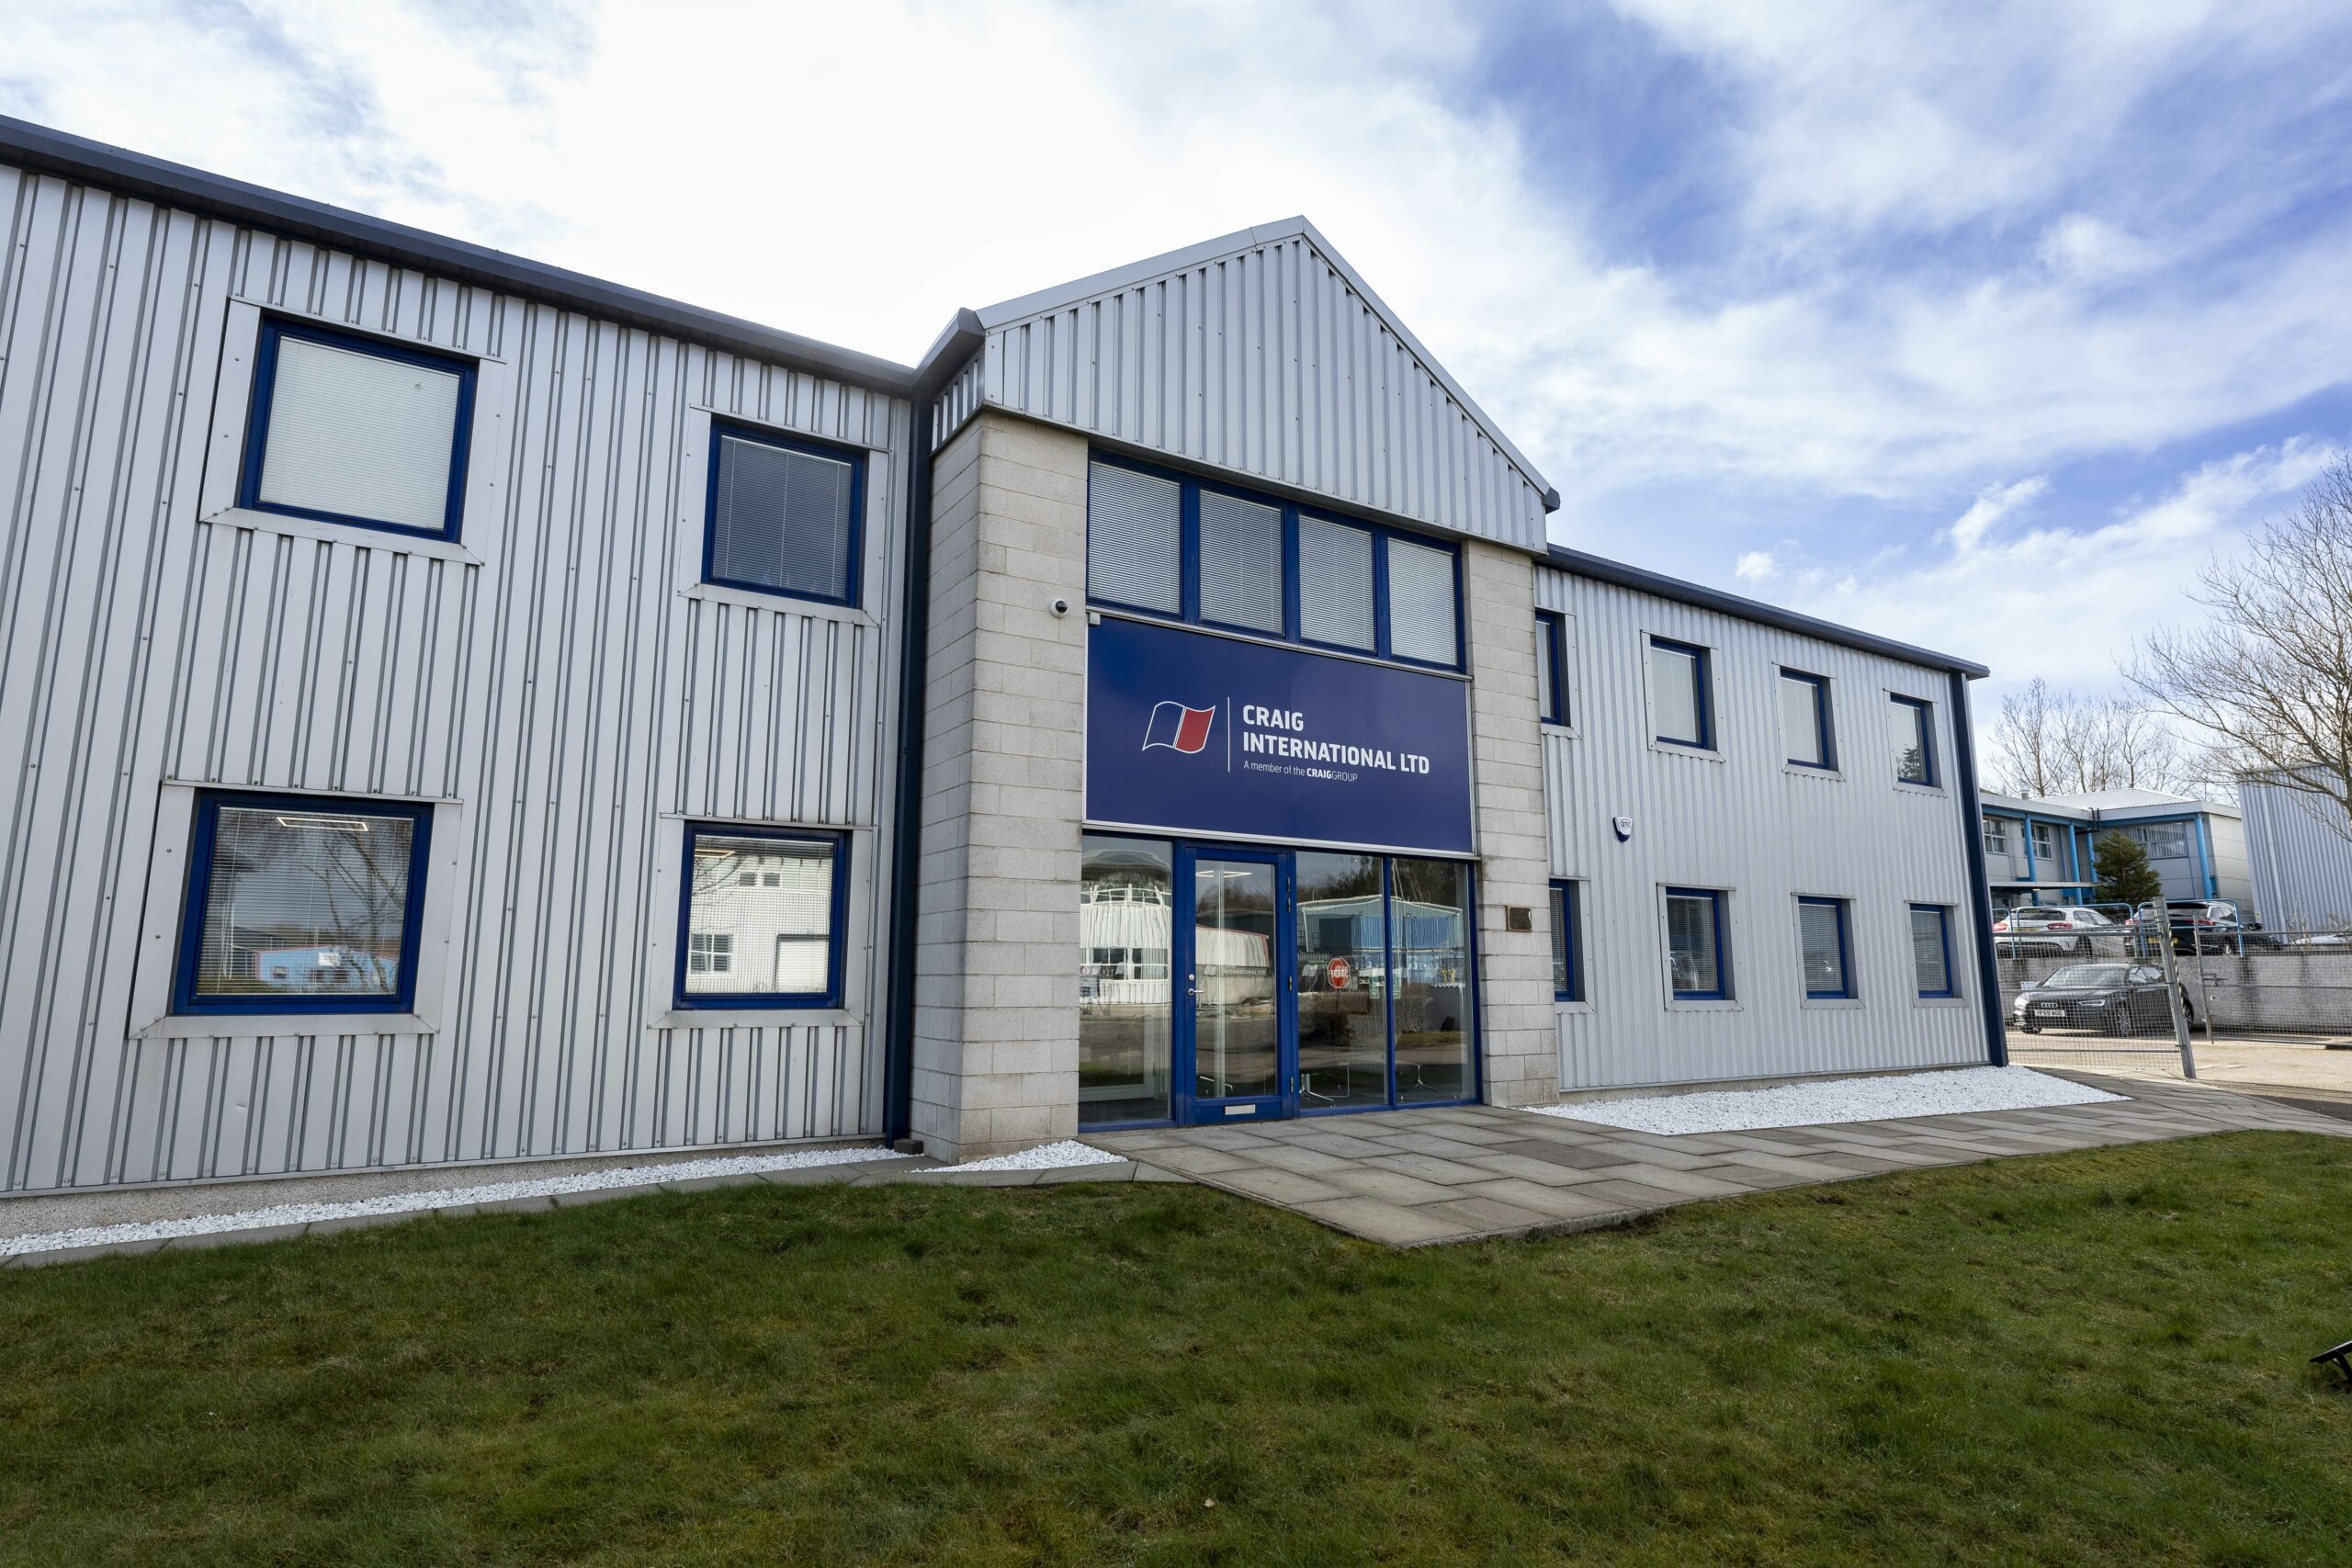 MEMBER NEWS: Craig International marks 25th anniversary with £1m investment in new global HQ